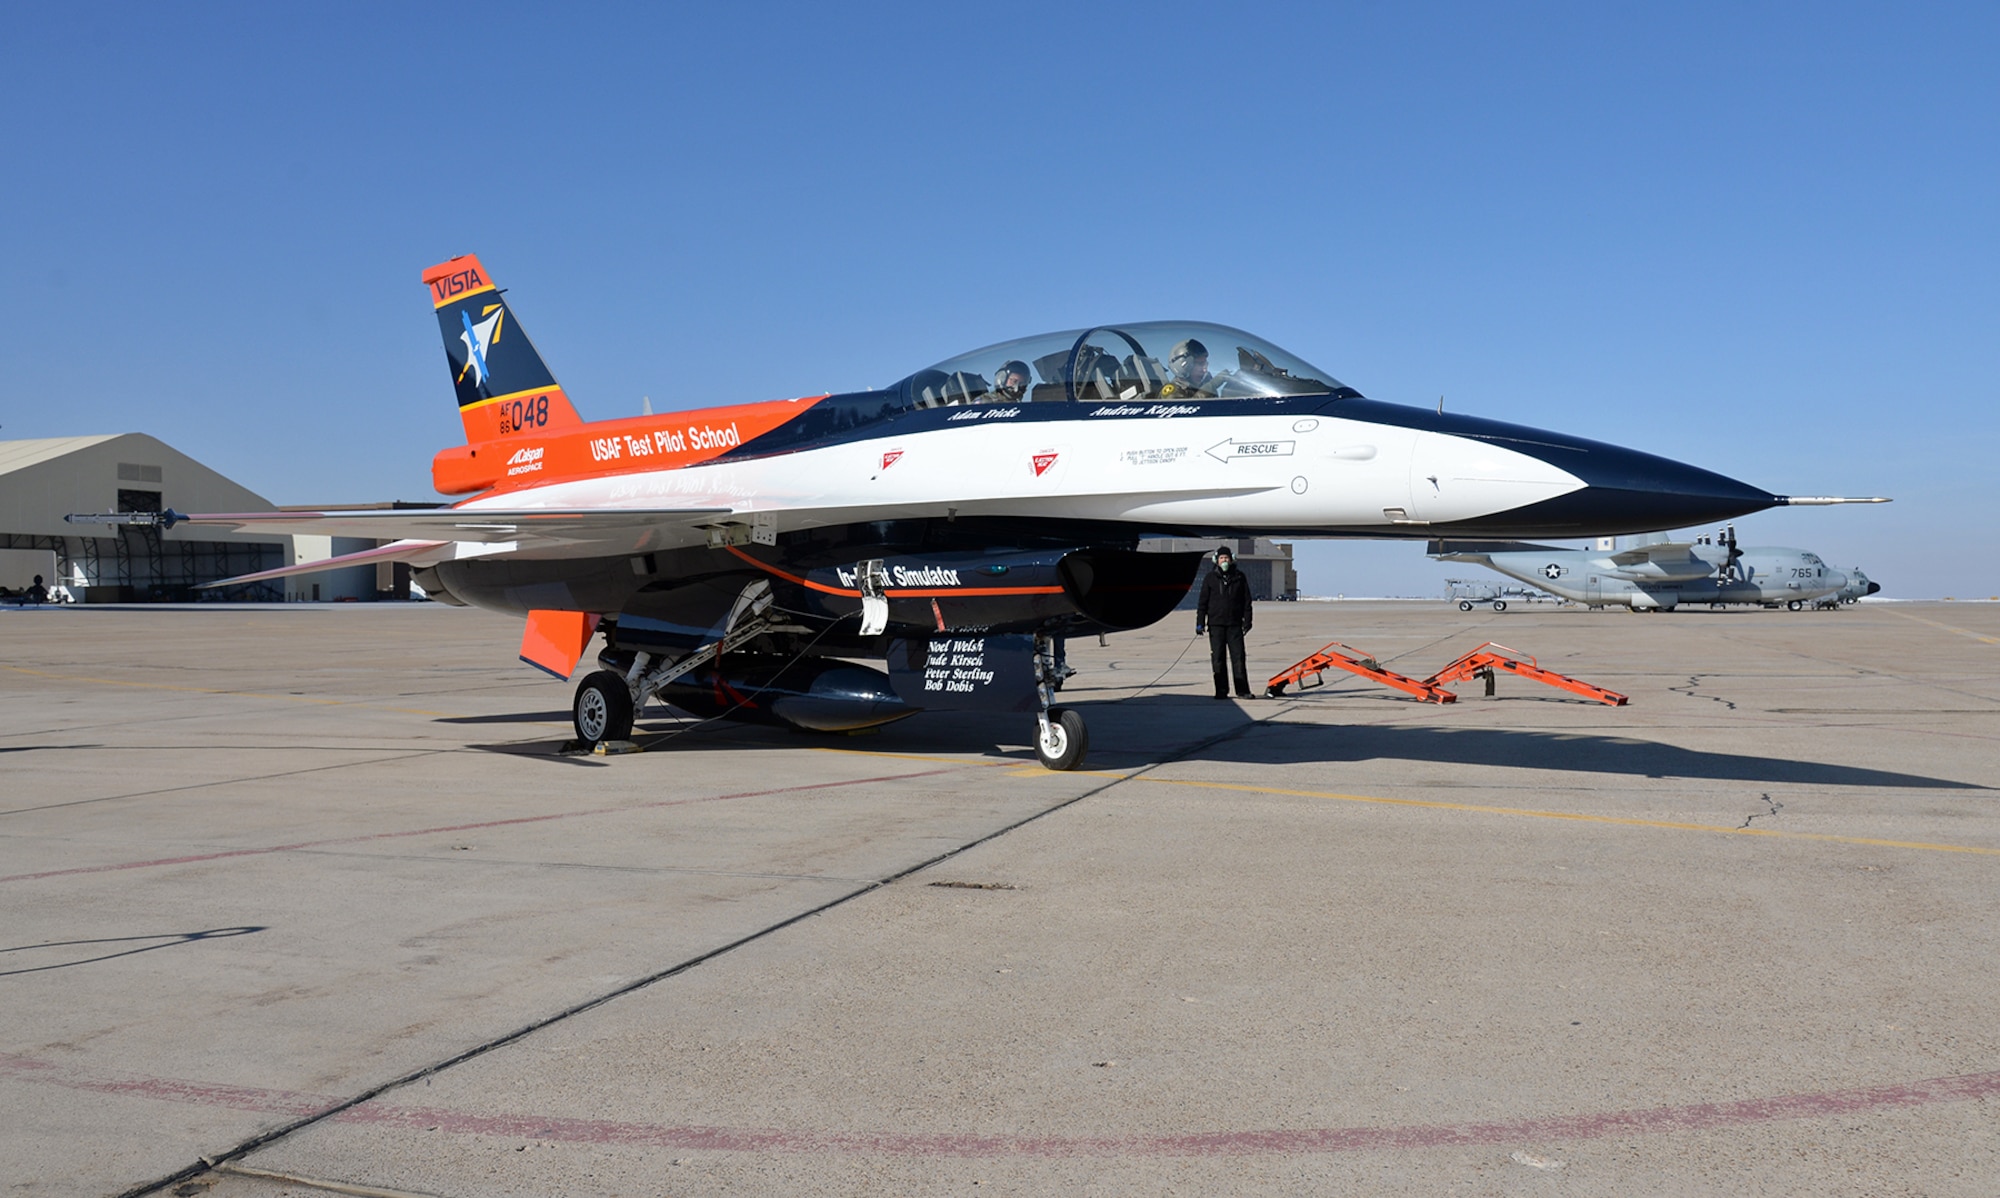 After recently receiving a new look and modifications at the Ogden Air Logistics Complex, the NF-16D known as VISTA (Variable stability In-flight Test Aircraft), prepares to depart Hill Air Force Base, Utah, Jan 30, 2019.  This aircraft is the only one of its kind in the world and is the flag-ship of the United States Air Force Test Pilot School. This F-16 has been highly modified, allowing pilots to change the aircraft flight characteristics and stability to mimic that of other aircraft.  (U.S. Air Force photo by Alex R. Lloyd)